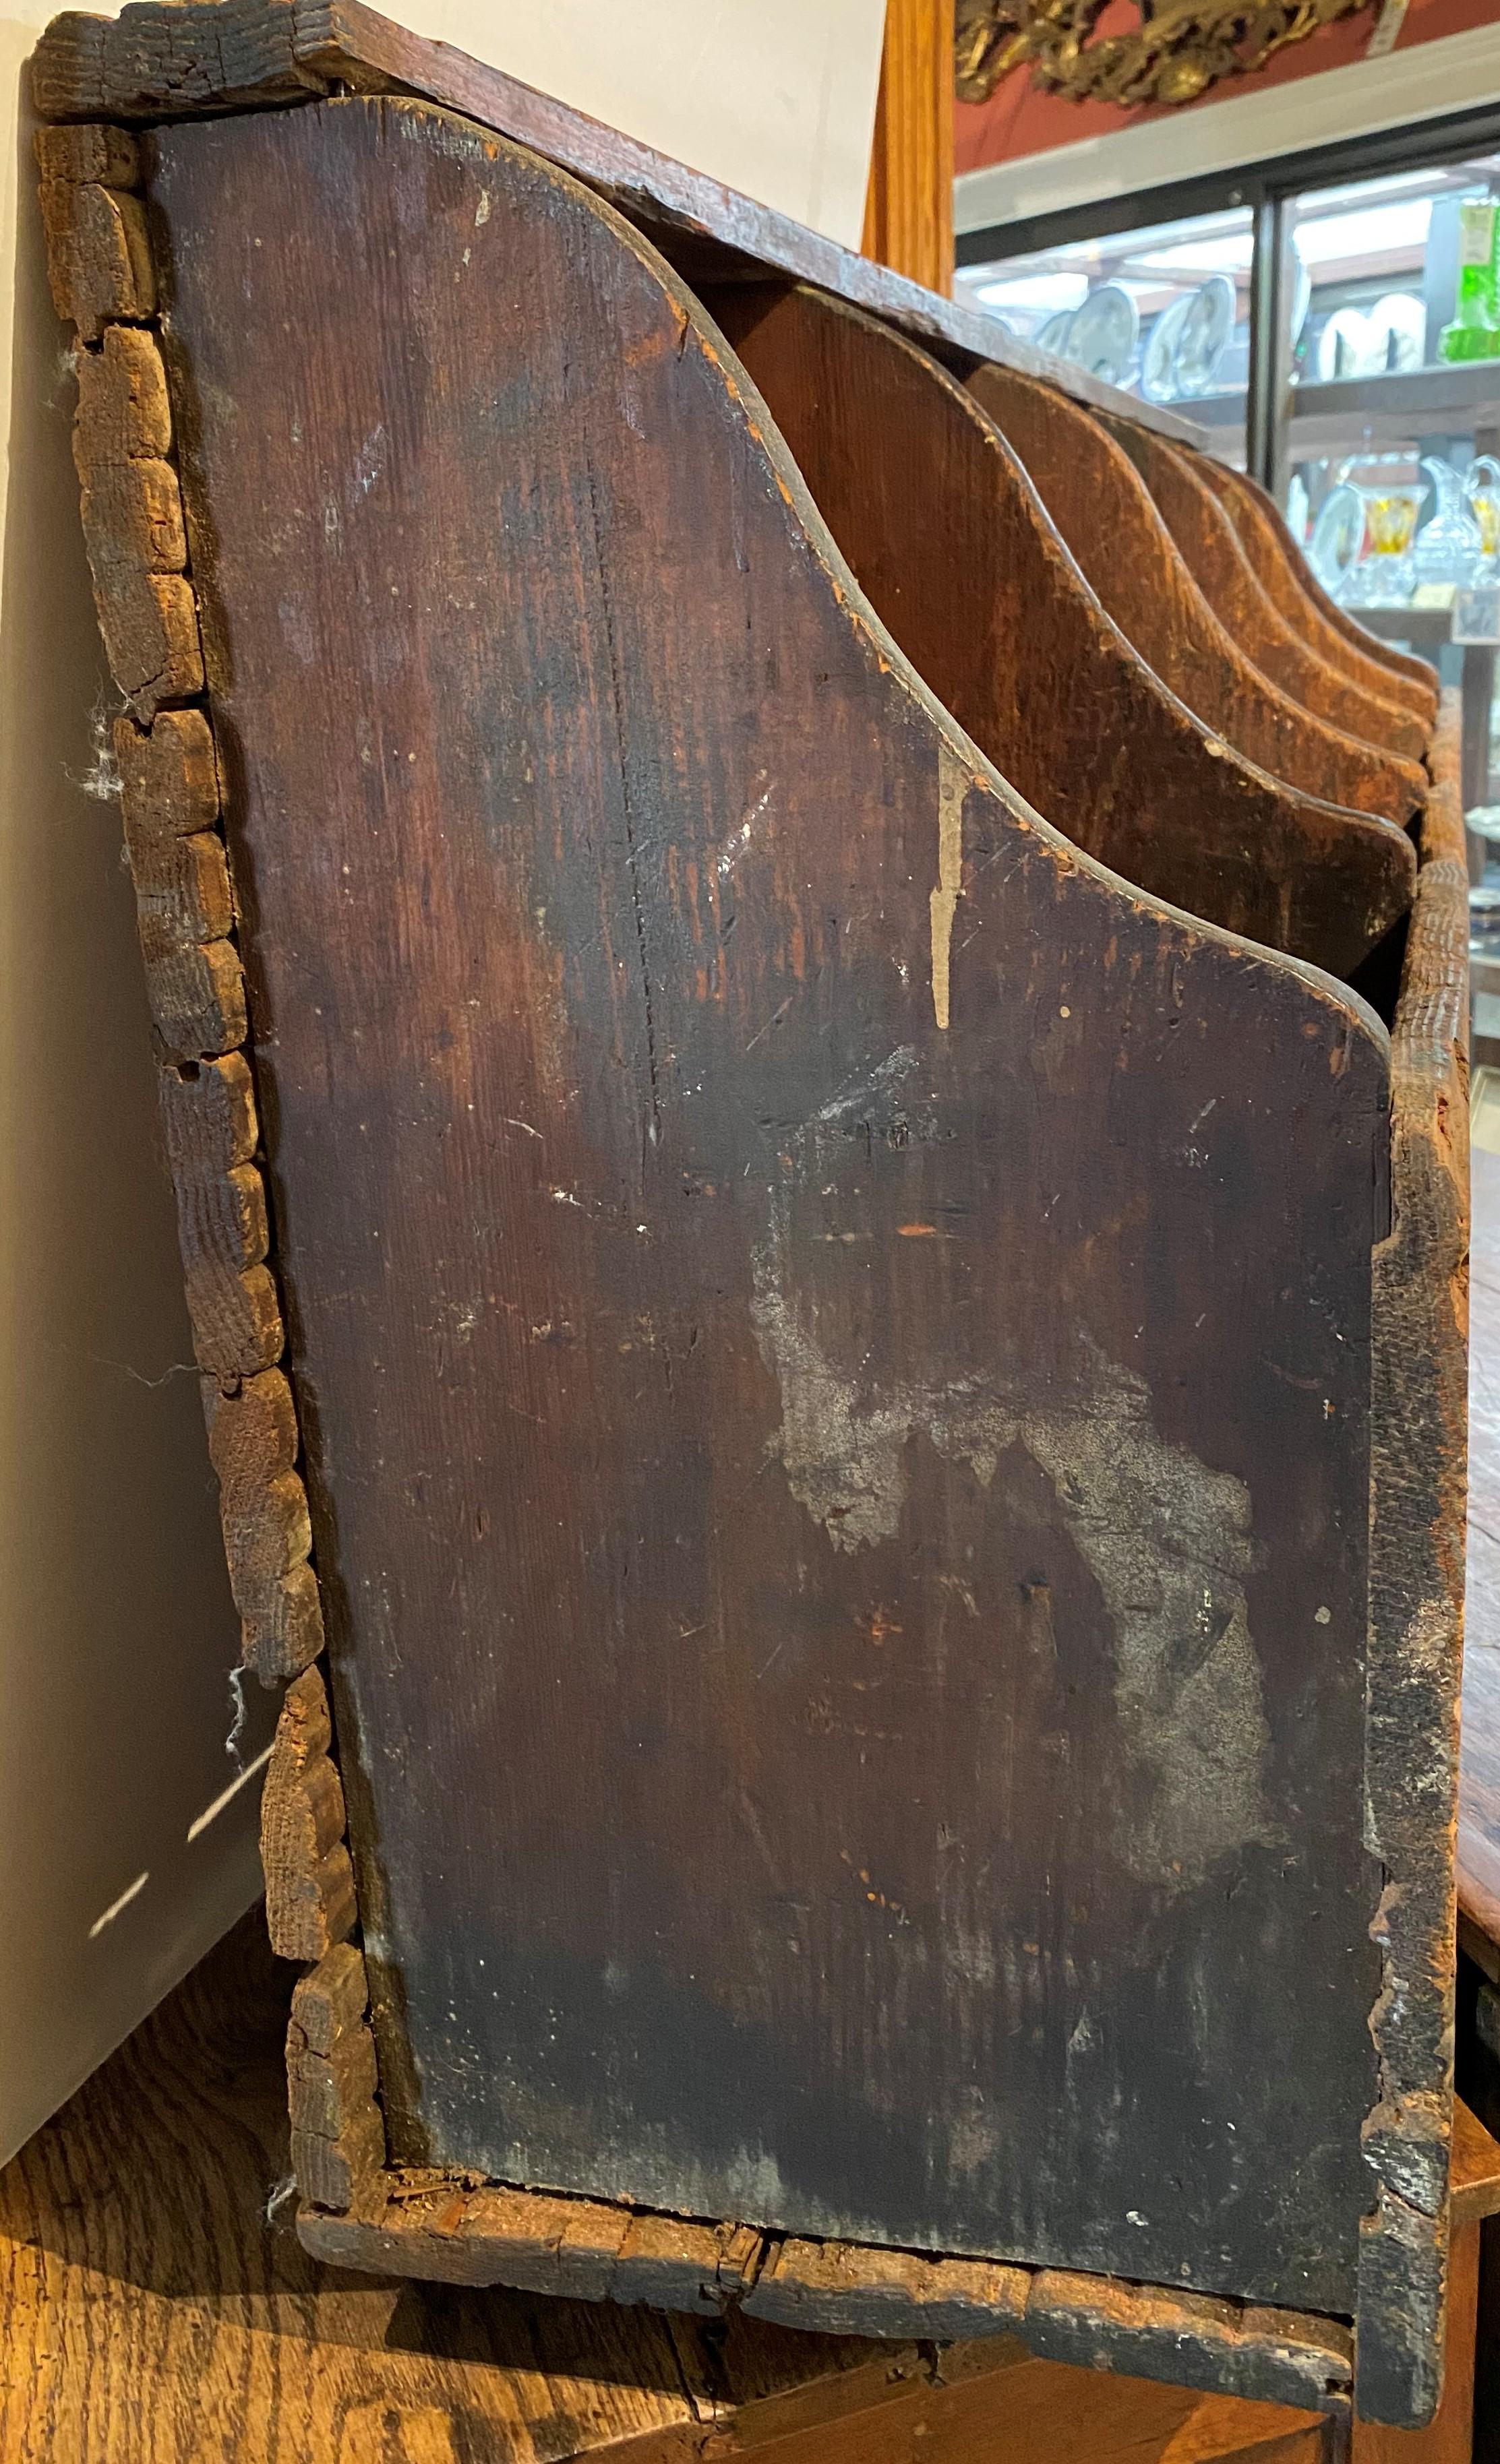 A 19th century primitive, orange and black painted grain bin with divided compartments. A great conversation and statement piece that could even be used as a woodbox for kindling, to store shoes in a mudroom, as a divider for recycling, and even